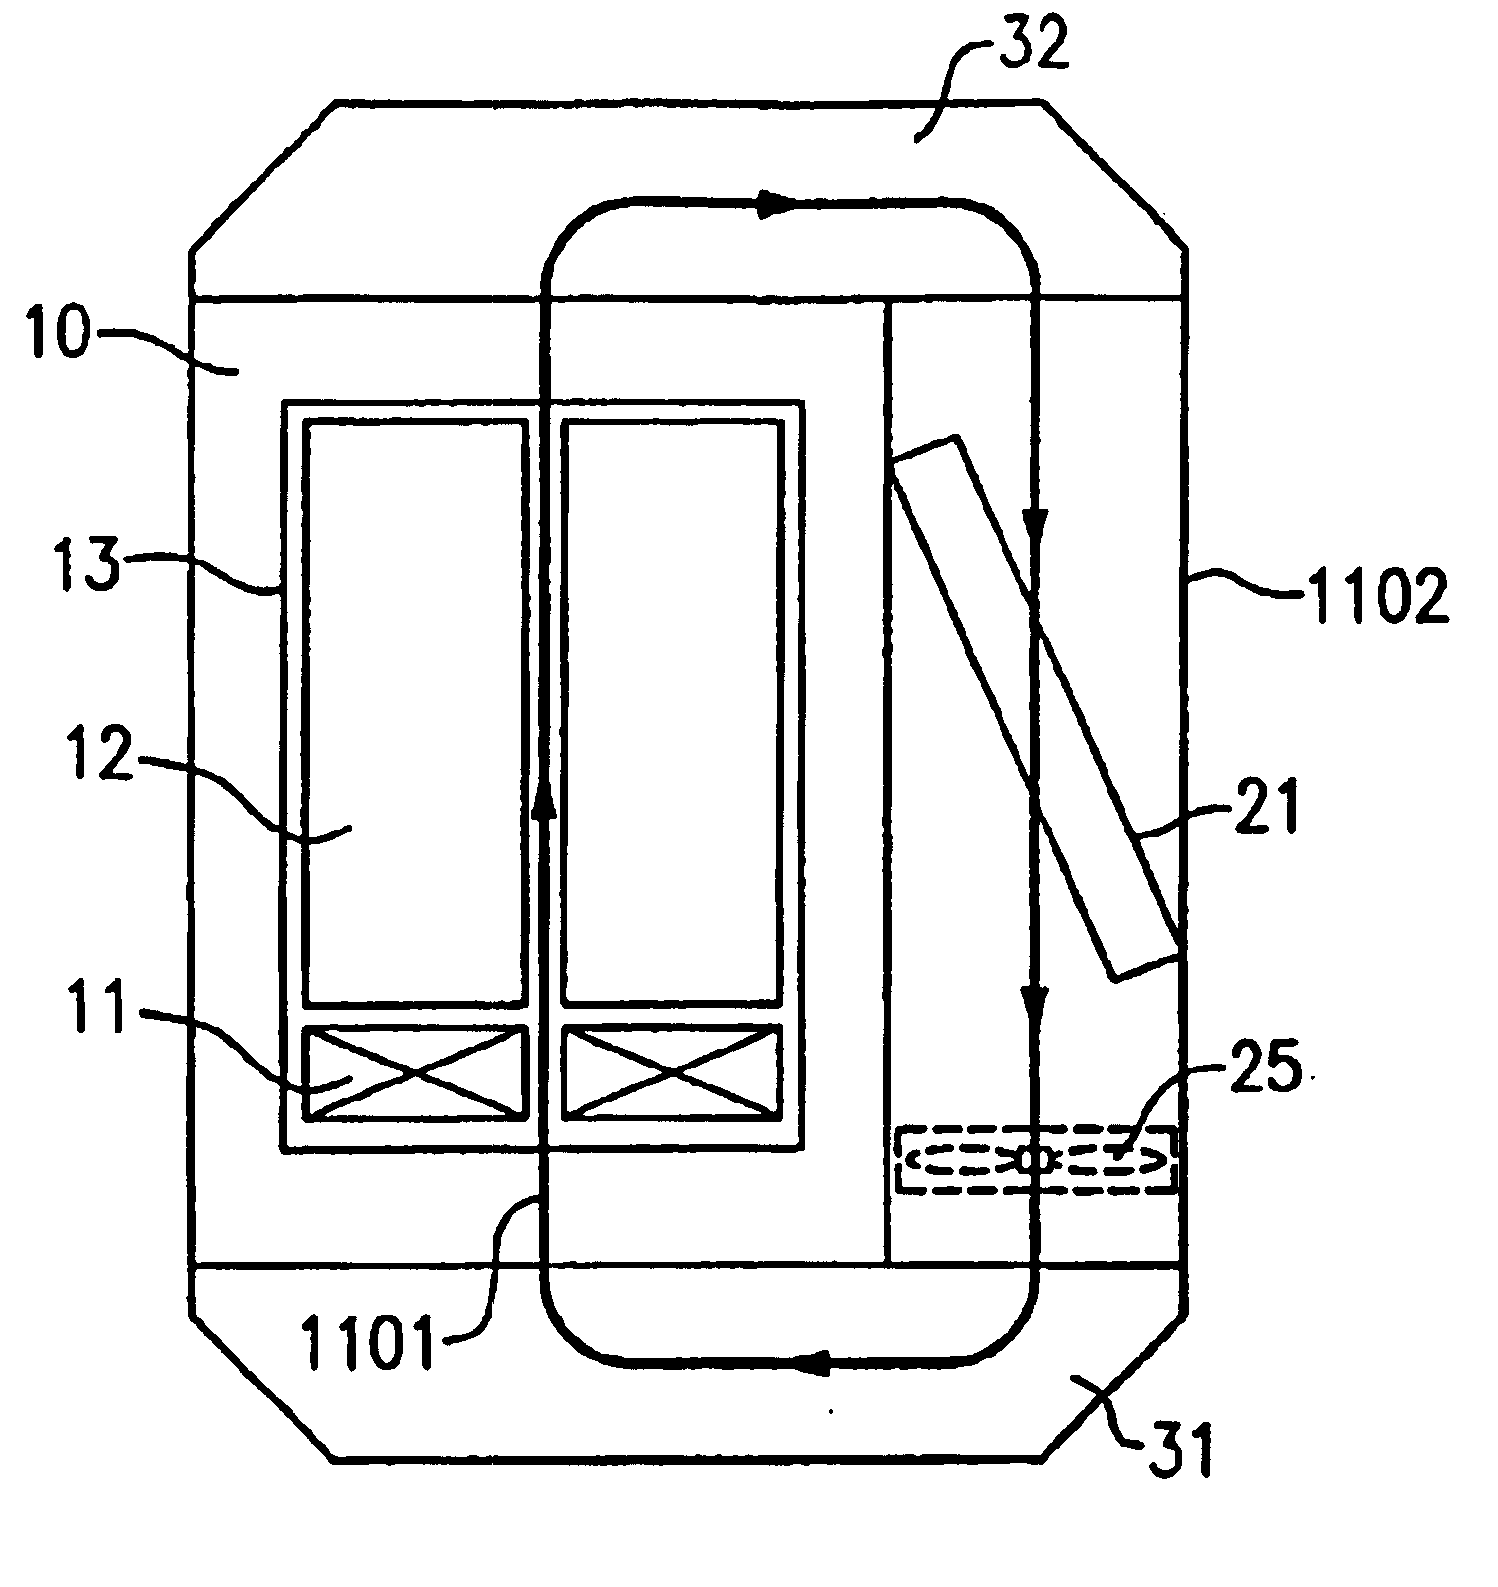 Method for combined air and liquid cooling of stacked electronics components